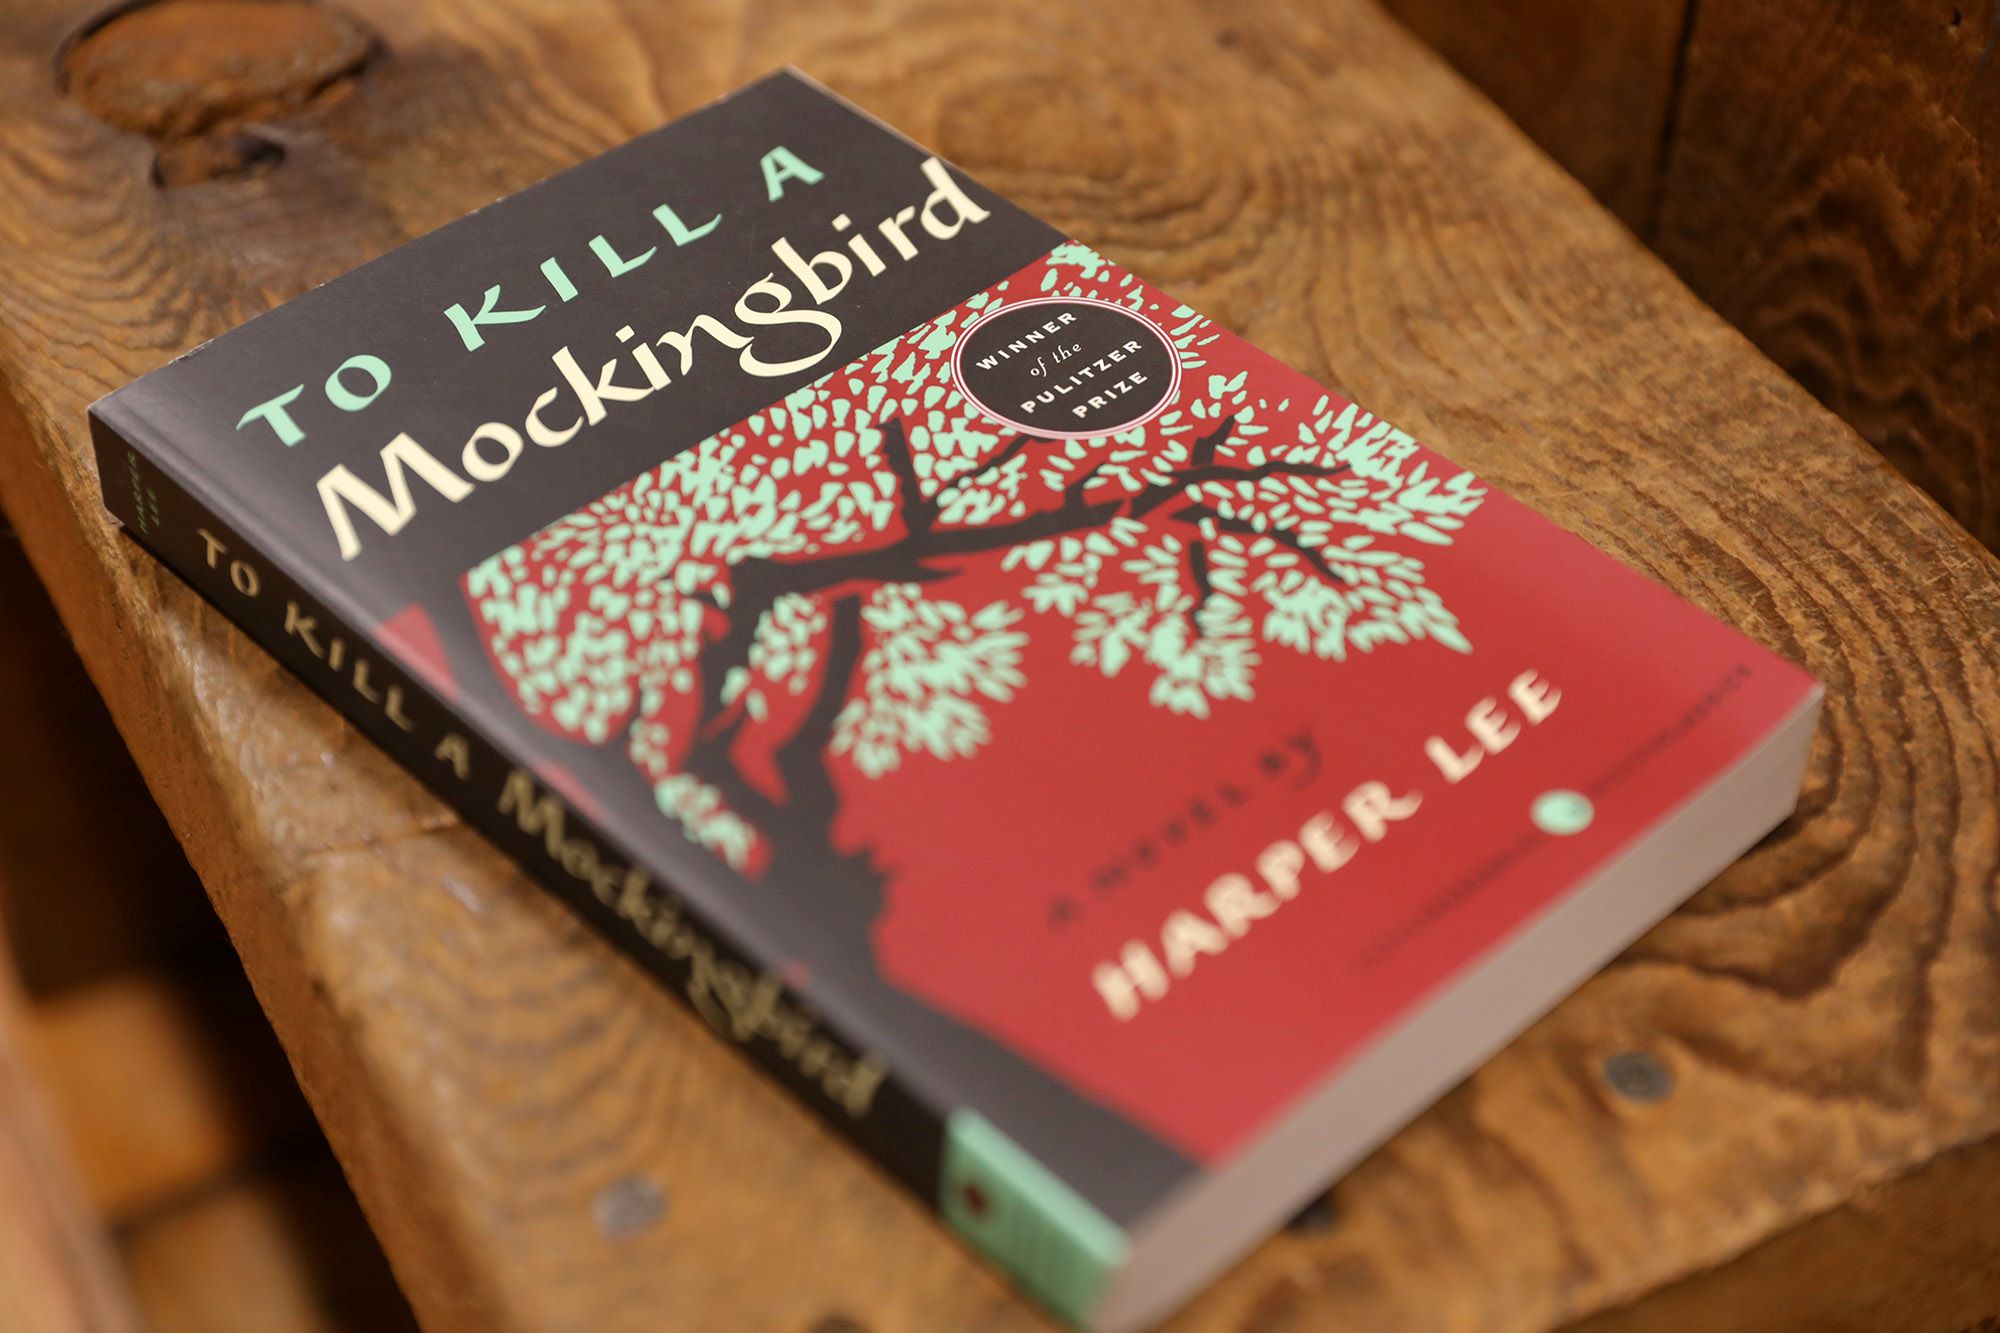 Best Sellers from Reader's Digest Condensed Books: To Kill a Mockingbird /  The Shoes of the Fisherman / Seven Days in May / To Catch an Angel by  Harper Lee